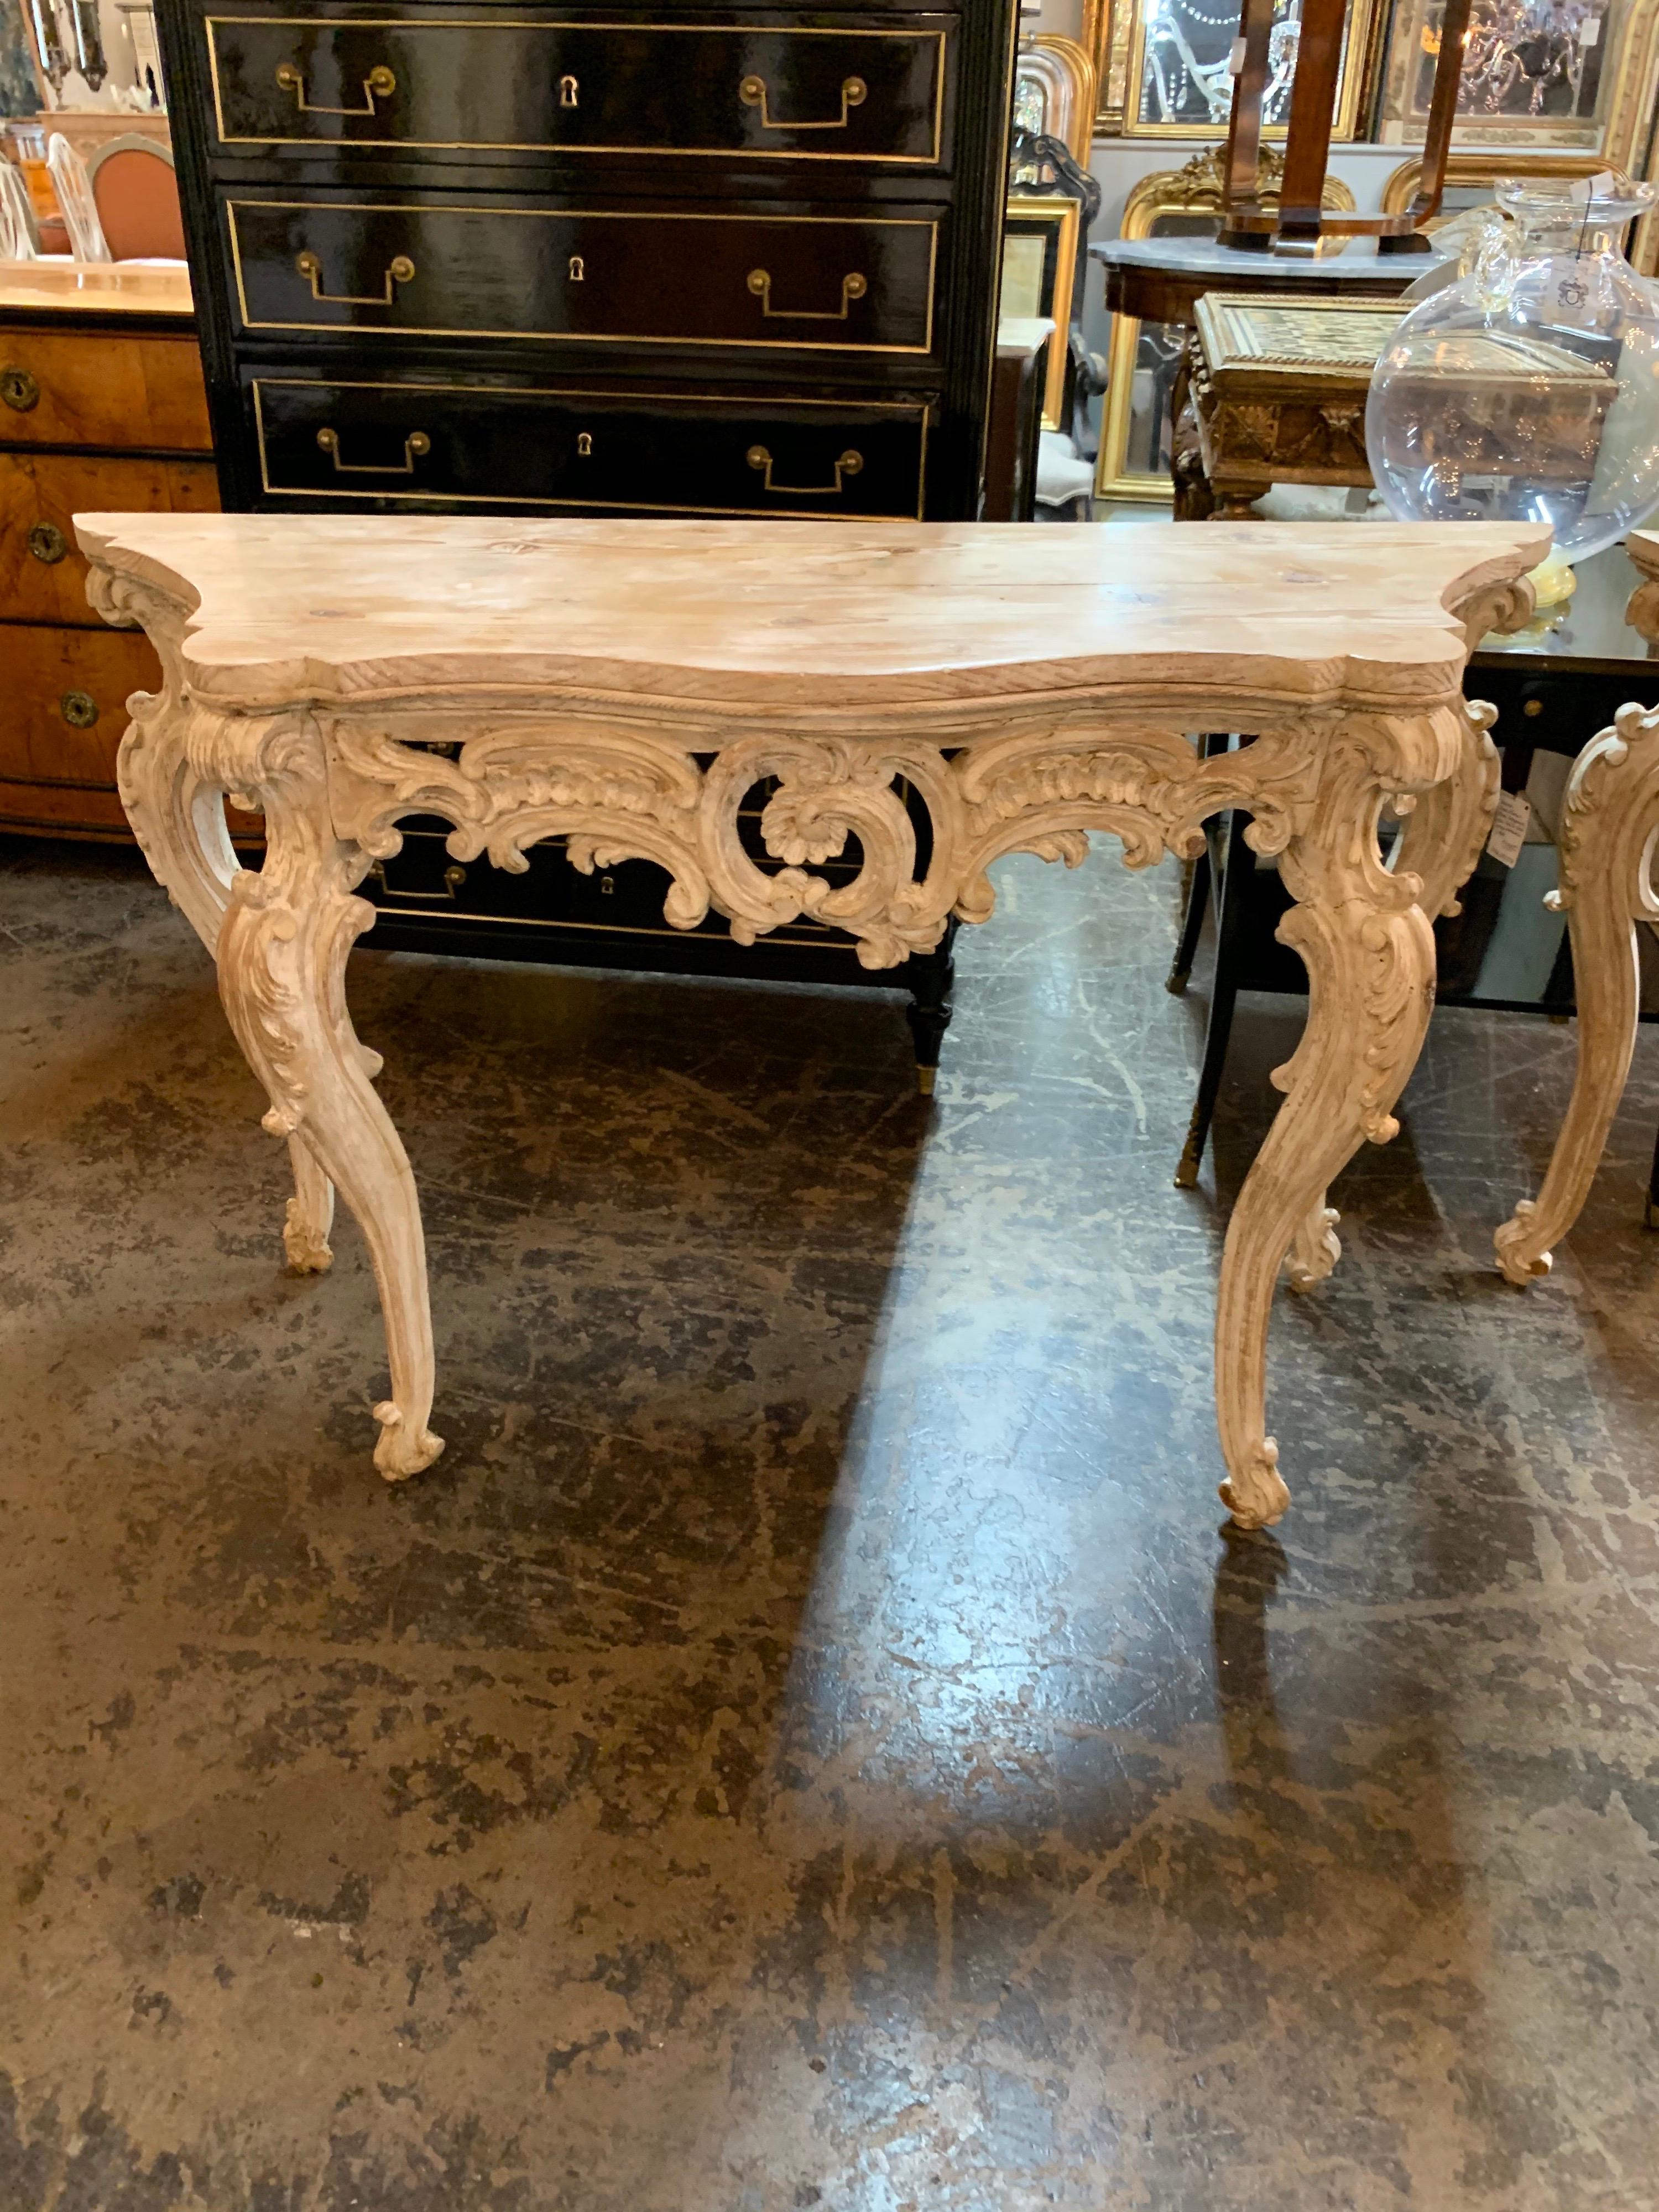 Amazing pair of 18th century French carved pine and gesso Louis XV style consoles. Very fine carving on this pair. Bleached look goes well with a variety of decors. So pretty!